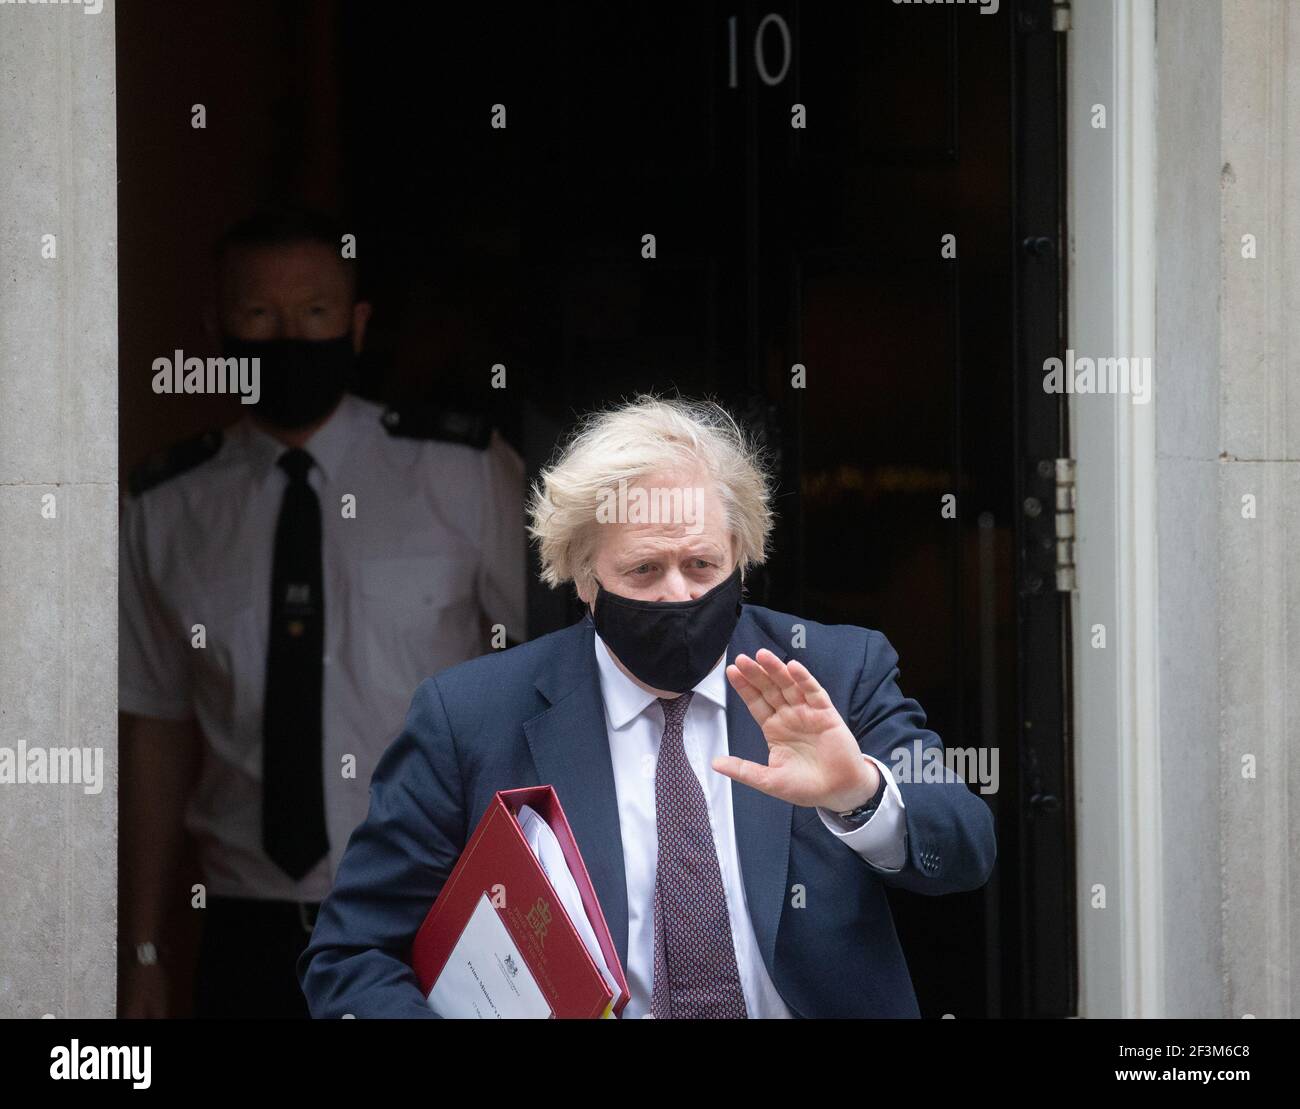 London, UK. 17th Mar, 2021. UK Prime Minister, Boris Johnson, leaves Number 10 Downing Street, to go to the House of Commons for Prime Minister's Questions. He will face Keir Starmer across the despatch box. Credit: Mark Thomas/Alamy Live News Stock Photo